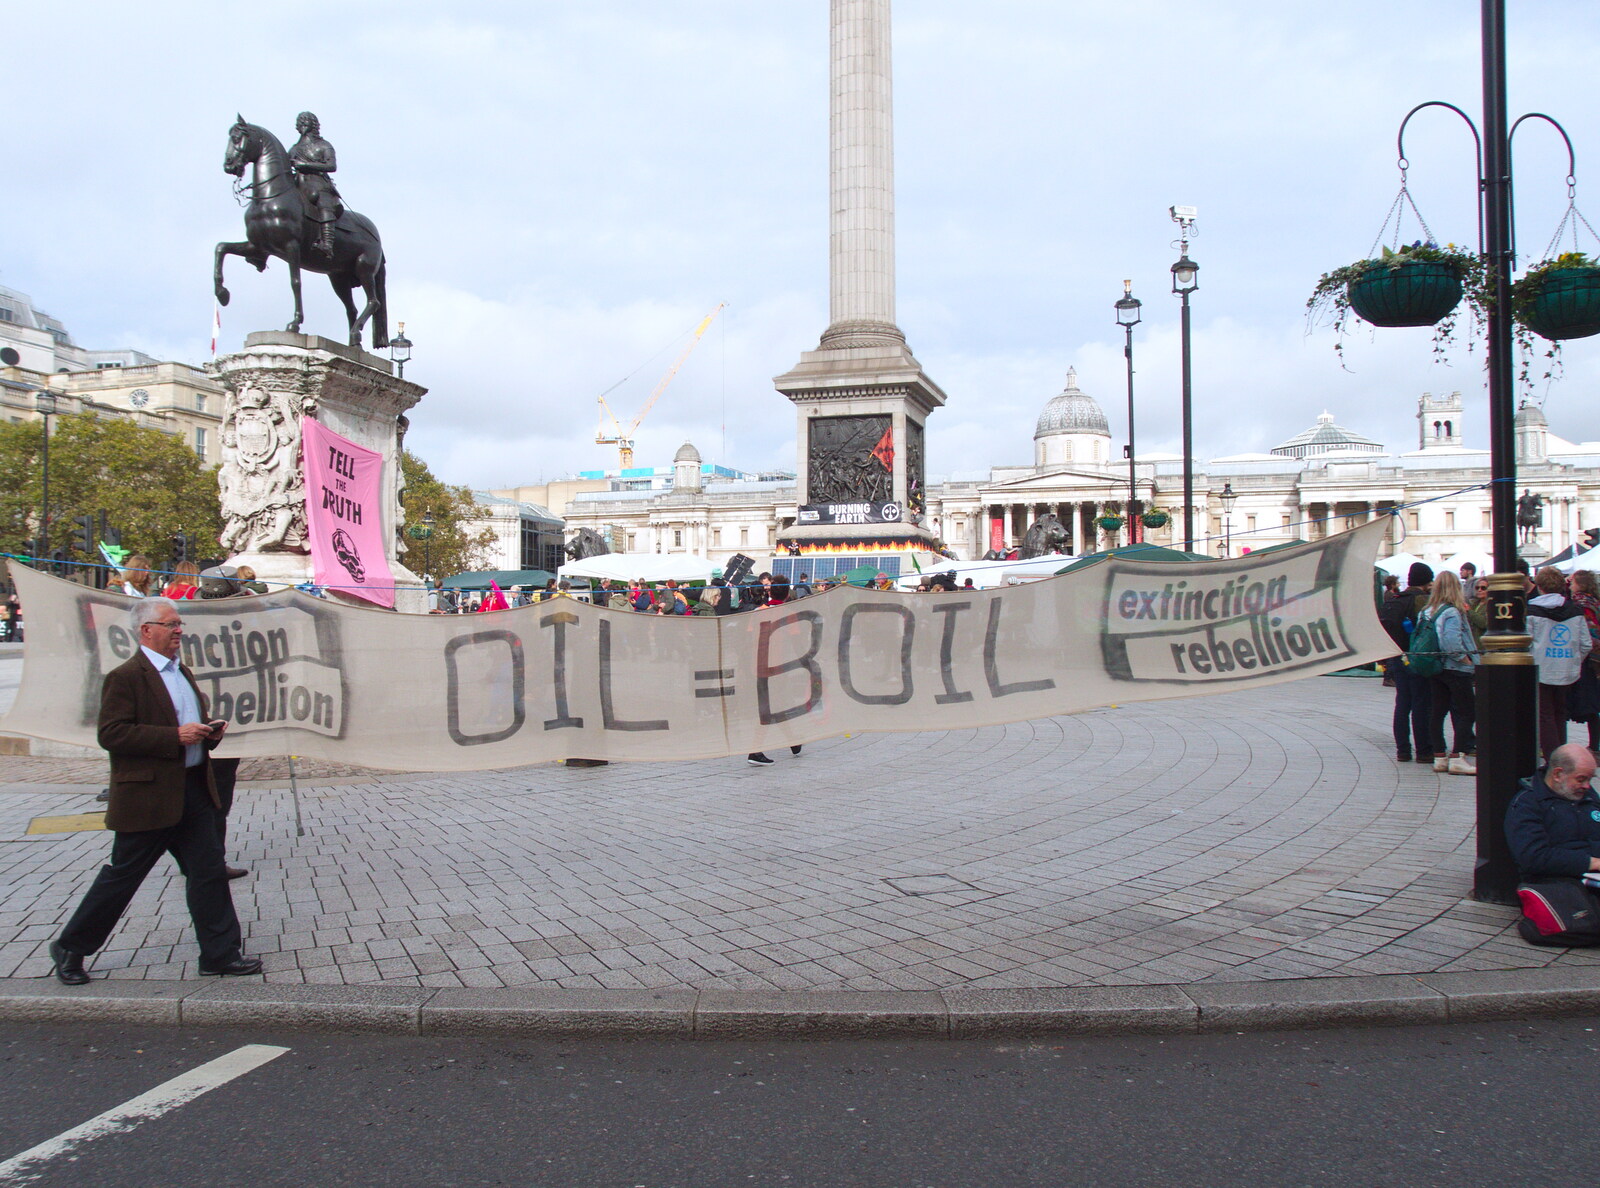 A businessman walks past an oil=boil banner from The Extinction Rebellion Protest, Westminster, London - 9th October 2019